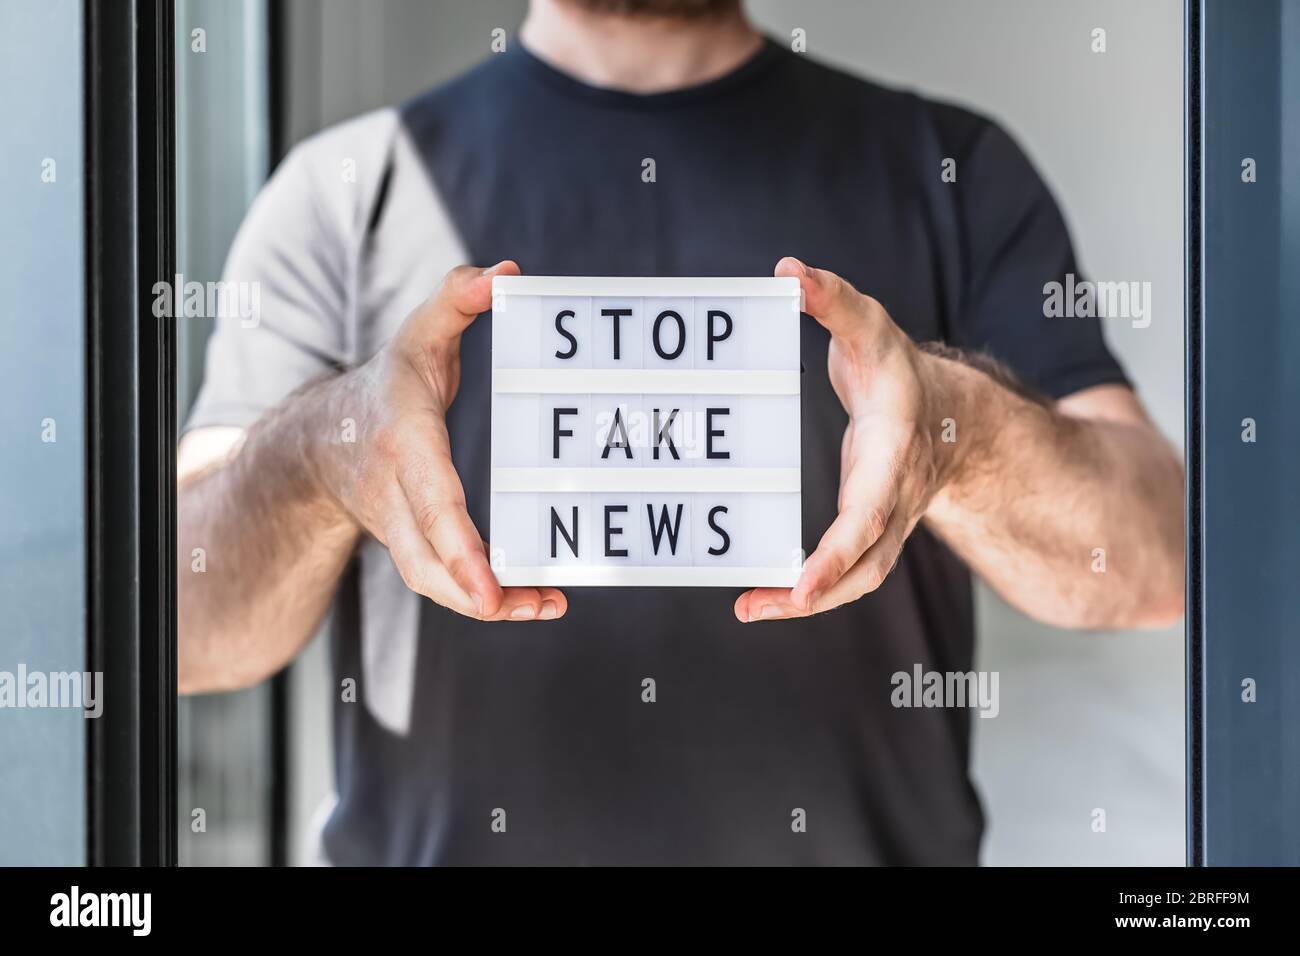 Fake news infodemics during Covid-19 pandemic concept. Man hands holding lightbox with text Stop fake news on foreground. People want to know the trut Stock Photo